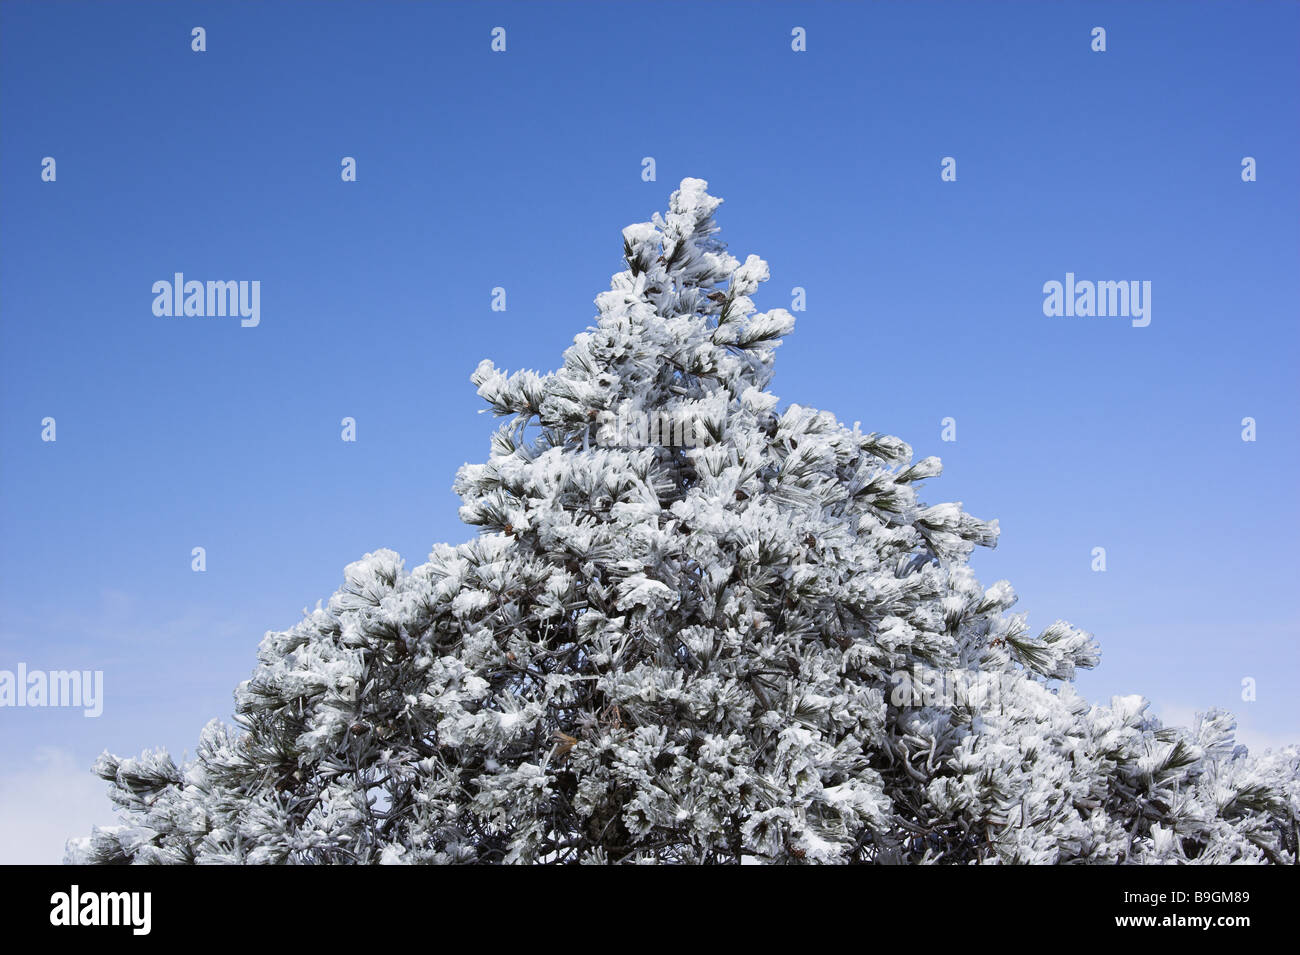 Huangshan mountains Huangshan pine Pinus hwangshanensis snow-covered winter close-up Broached Anhui Asia excerpt tree treetop Stock Photo